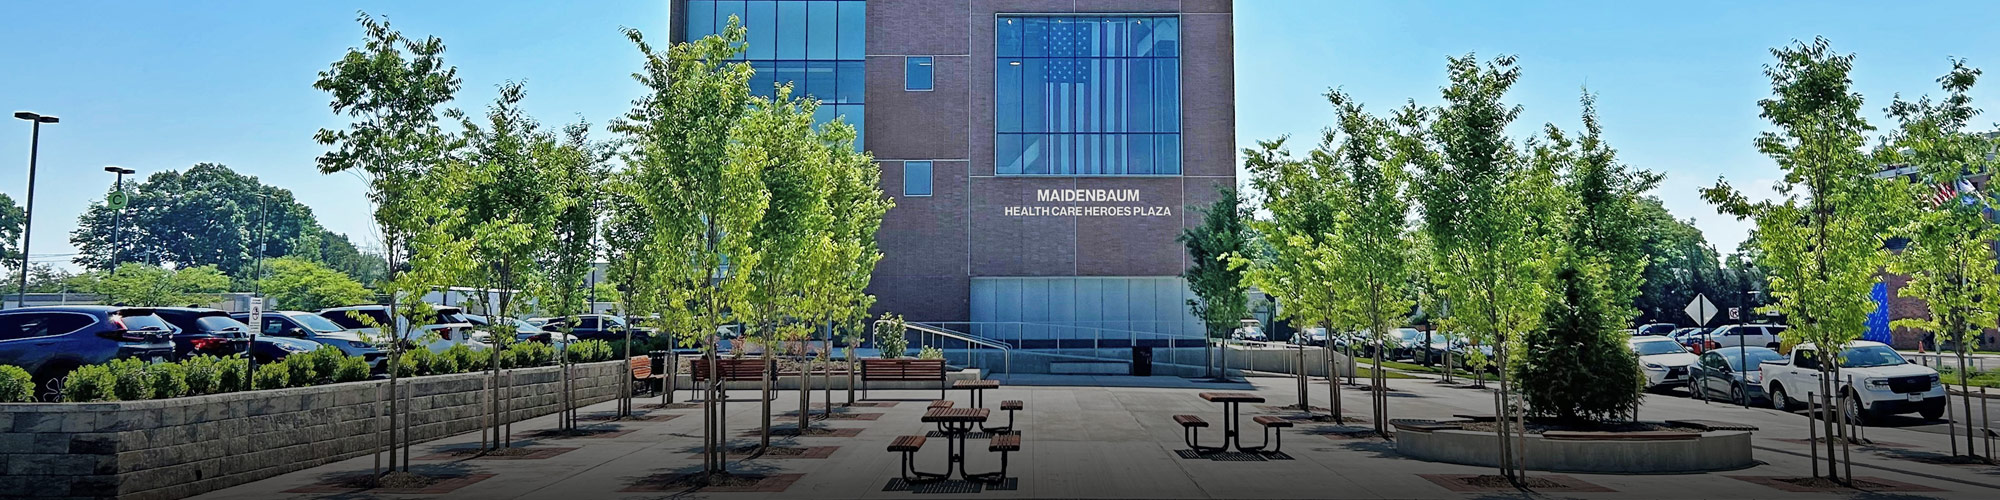  Maidenbaum Health Care Heroes Plaza Commemorating the brave nurses, doctors, and support staff who cared for thousands during the COVID-19 pandemic ... LEARN MORE> 